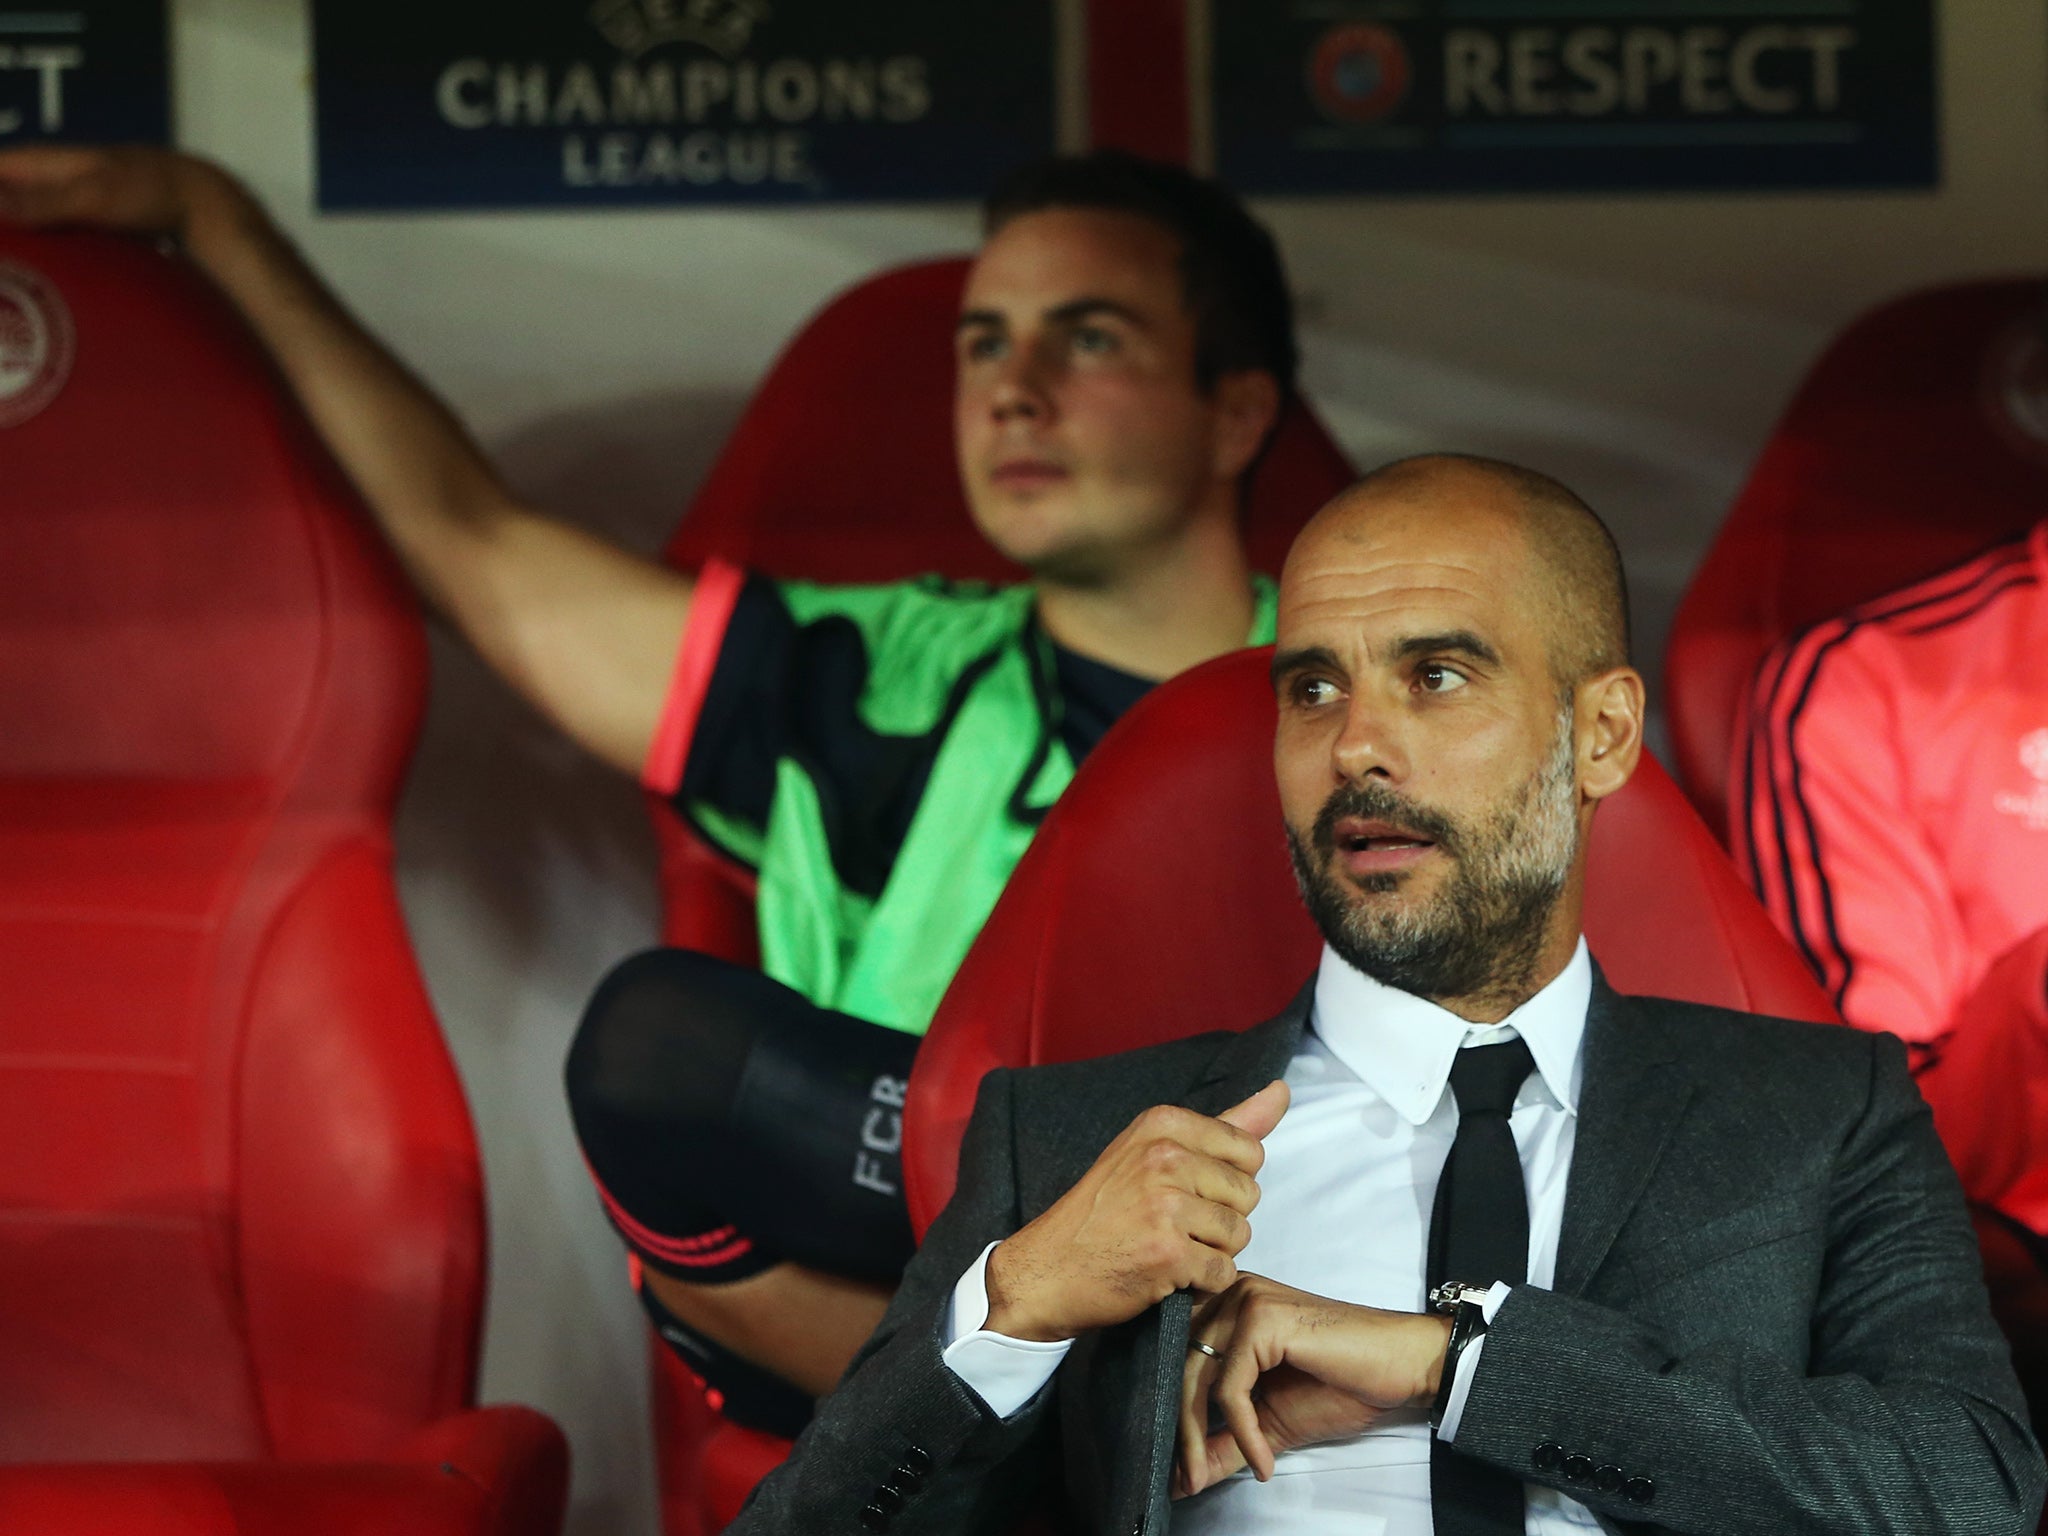 Bayern Munich manager Pep Guardiola sits in front of substitute Mario Götze